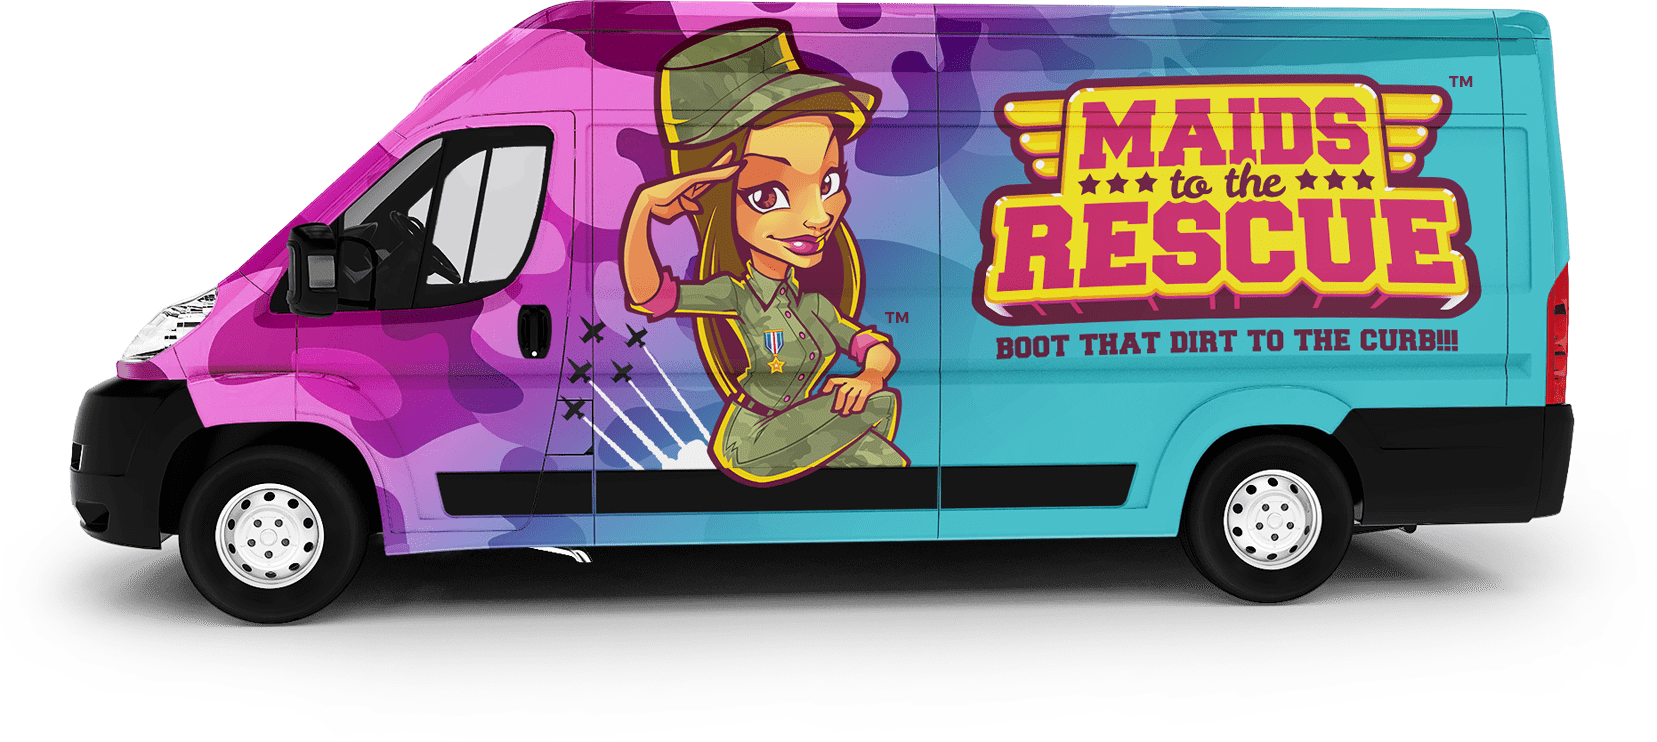 Maids to the Rescue van